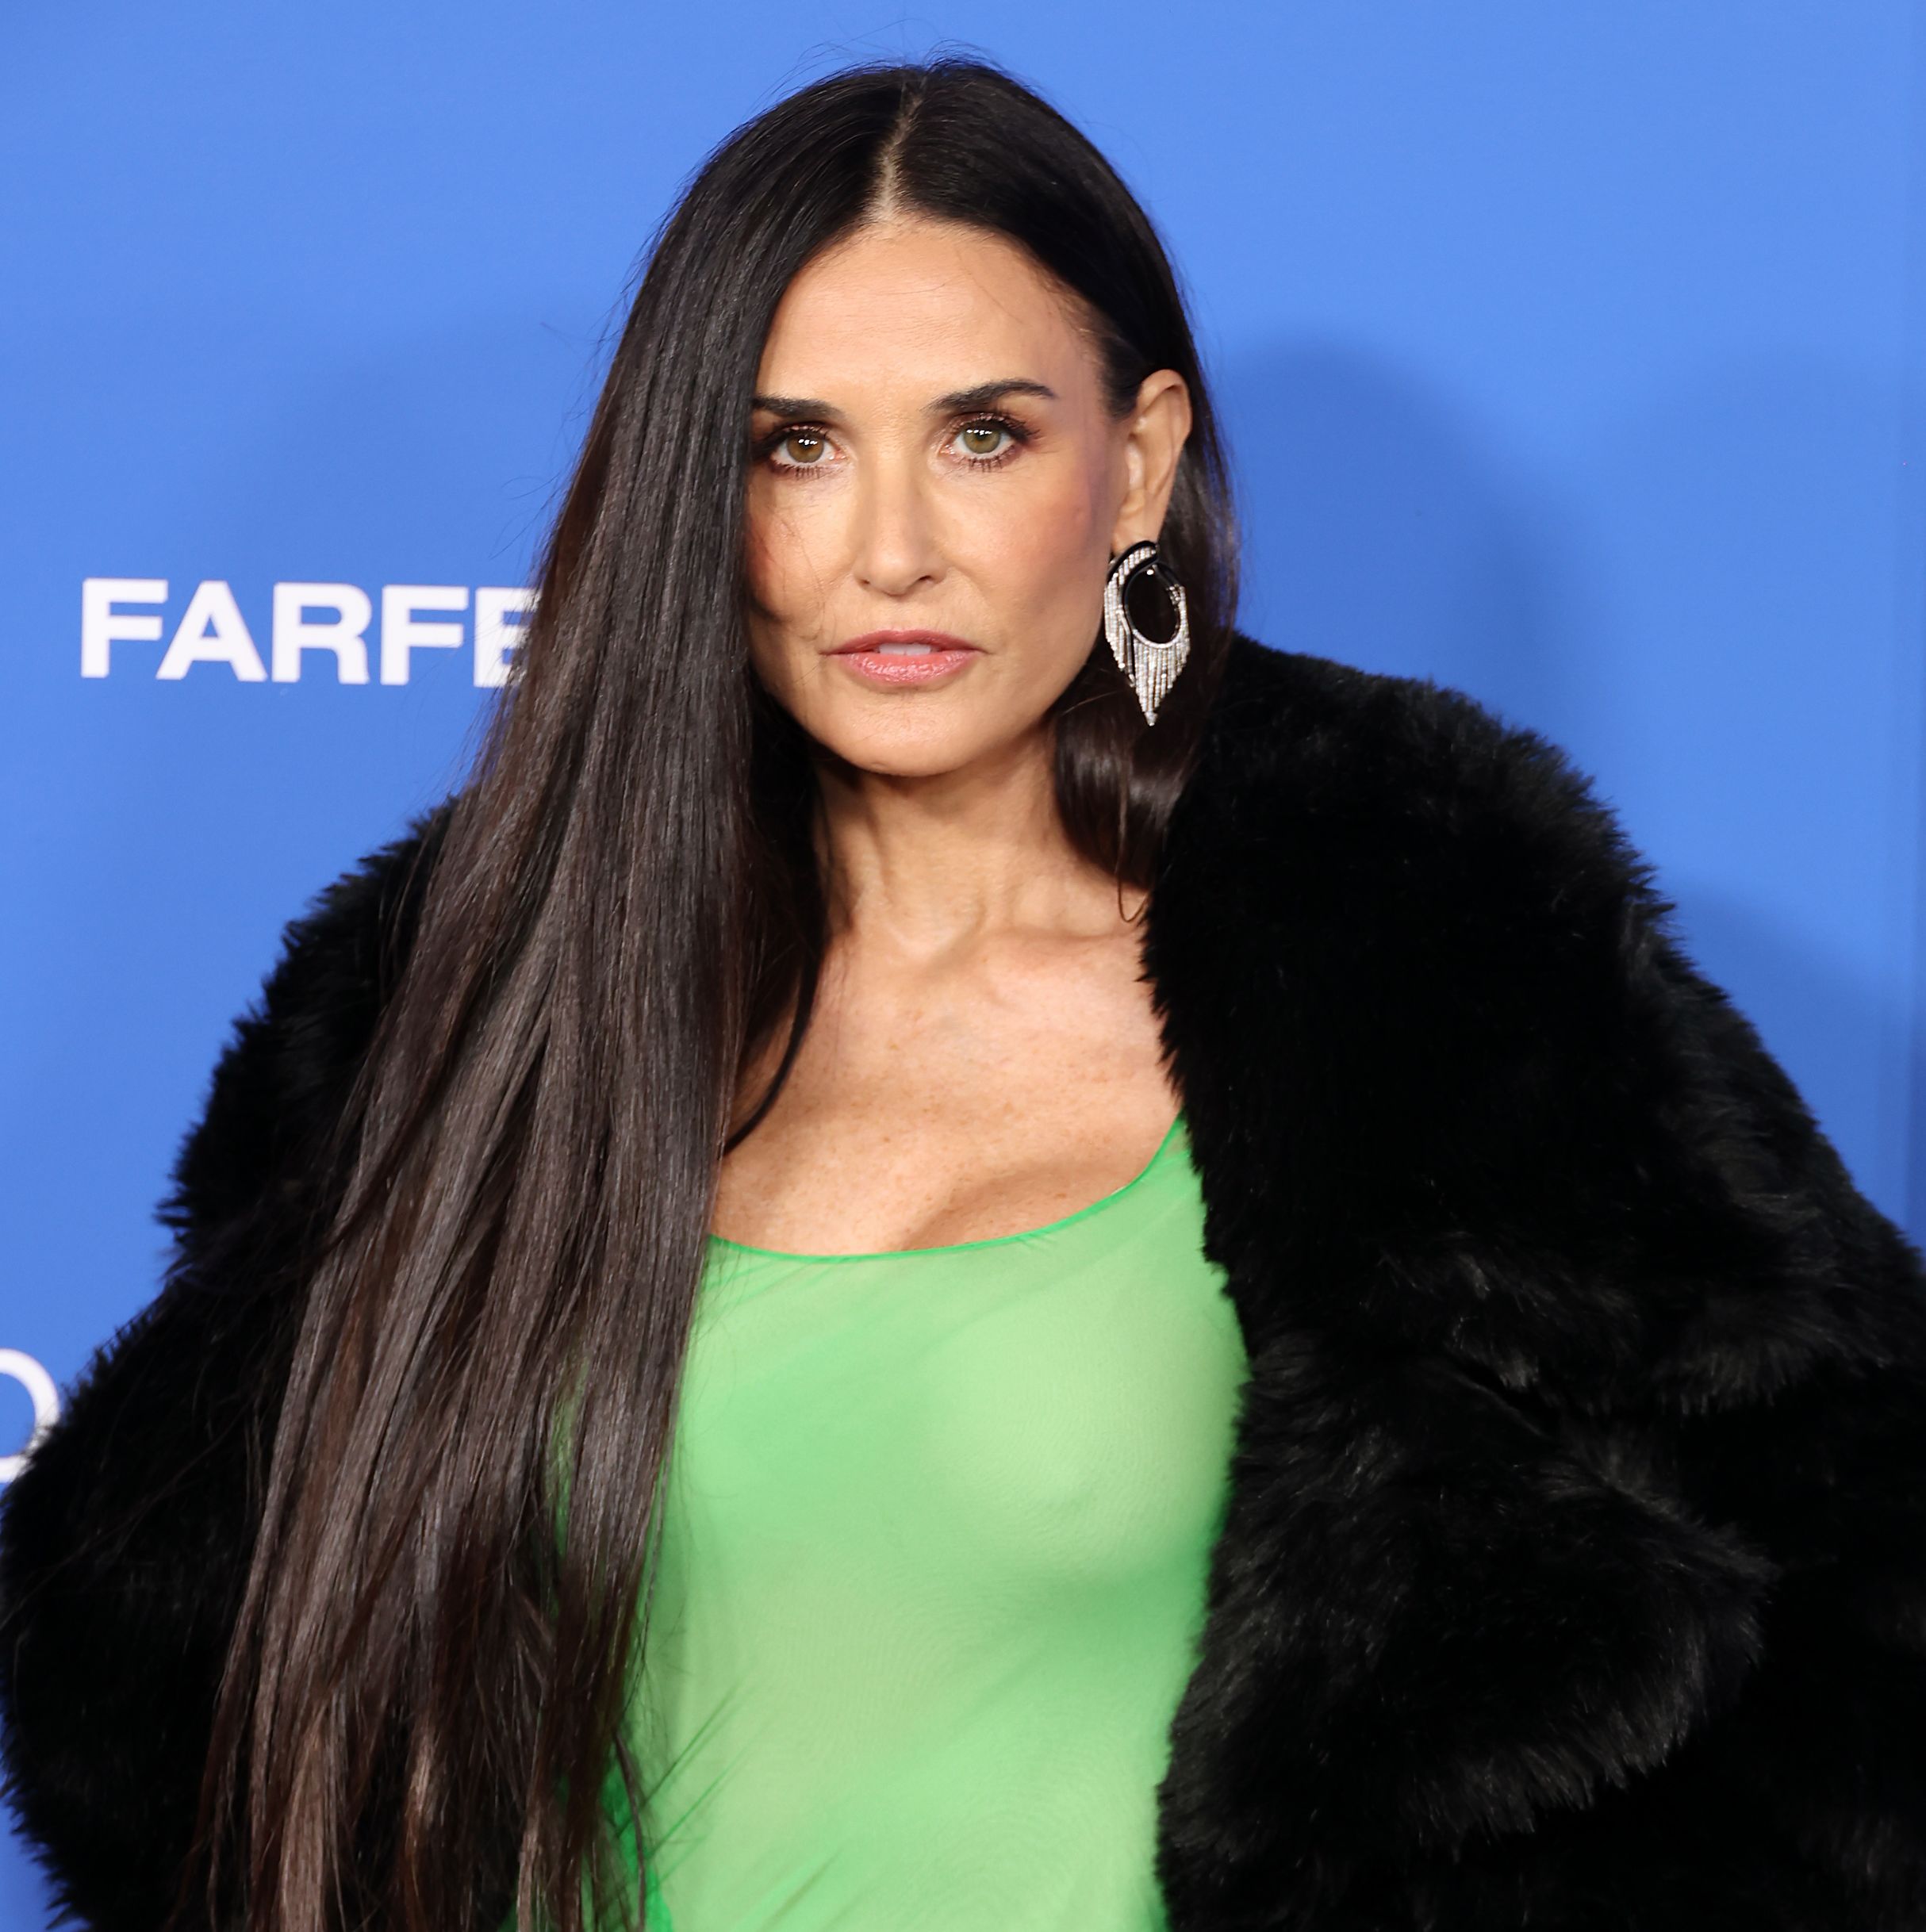 Demi Moore Says She's a 'Die-Hard' Fan of This Shampoo and Conditioner